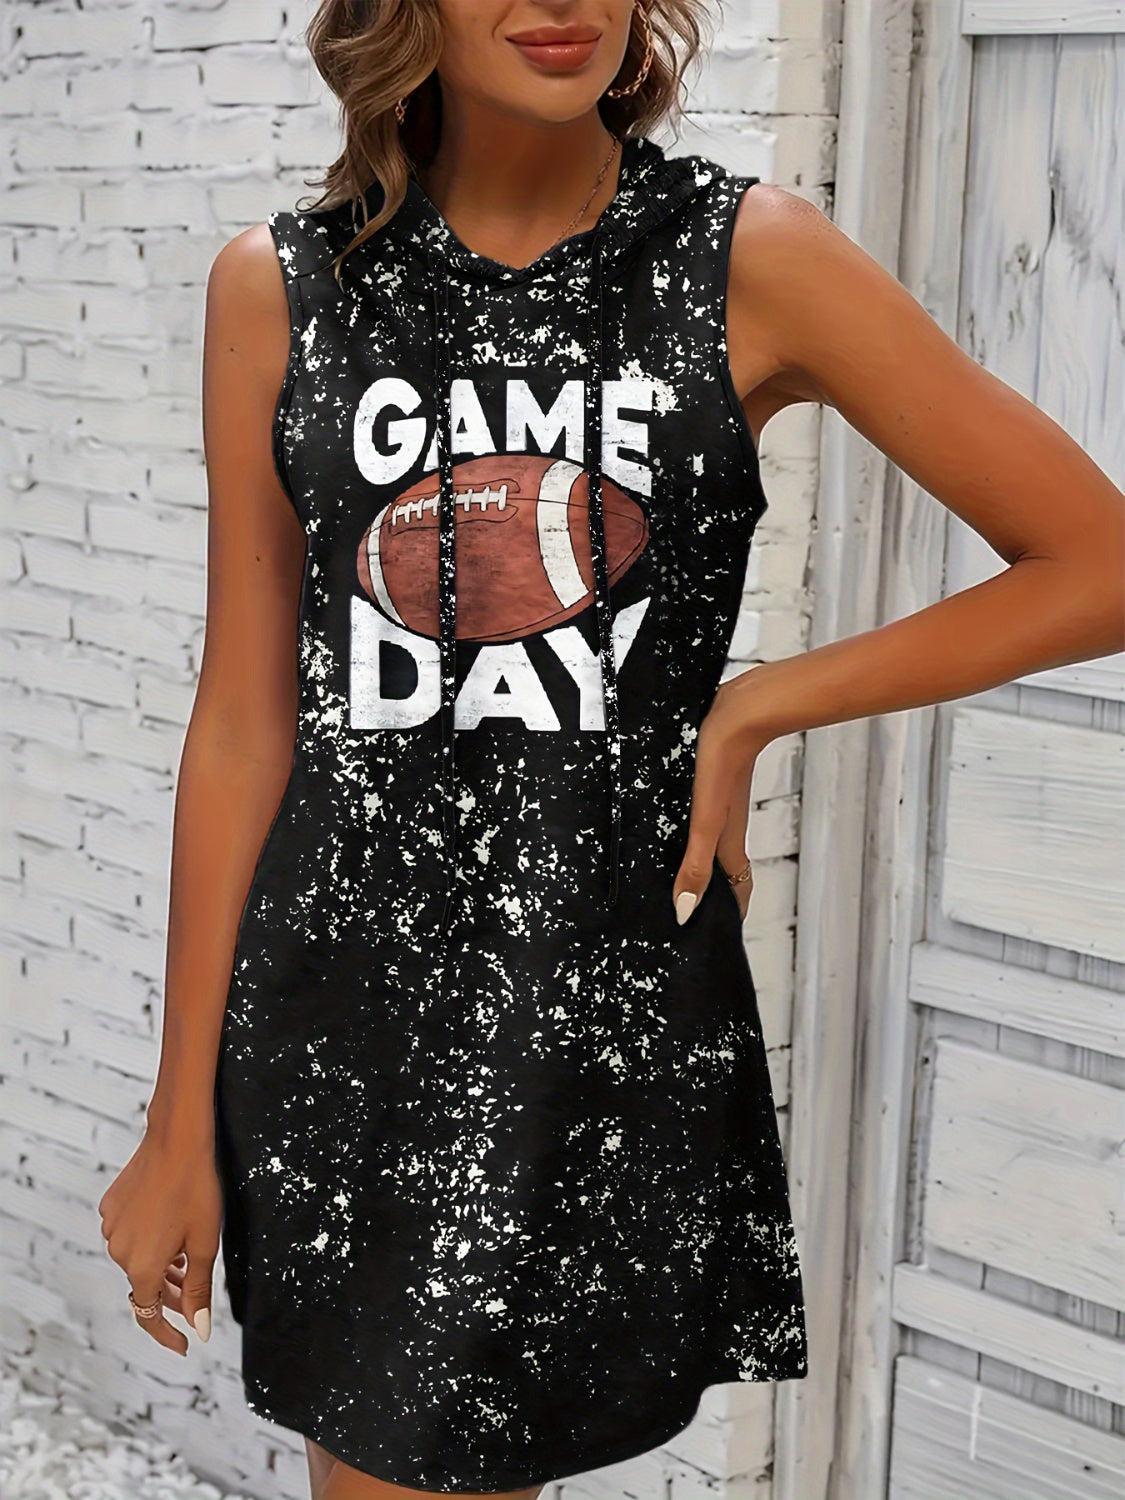 a woman wearing a black dress with a football game day on it